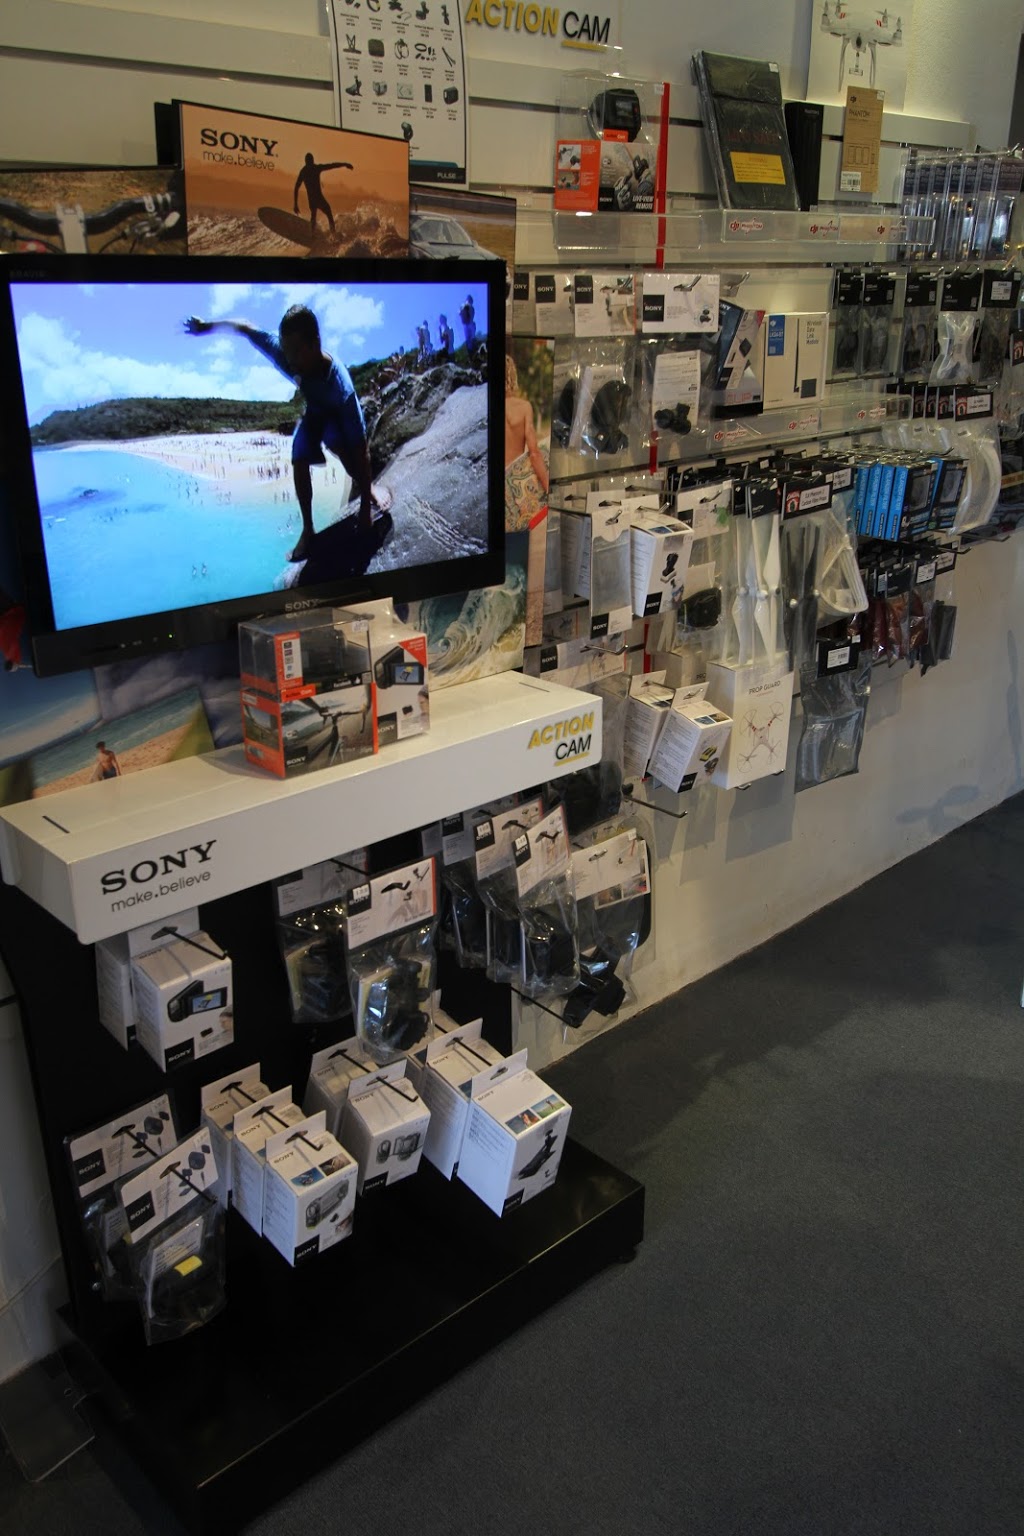 Camzilla | The Drone Experts | electronics store | 98 Pacific Hwy, Roseville NSW 2069, Australia | 0298809883 OR +61 2 9880 9883